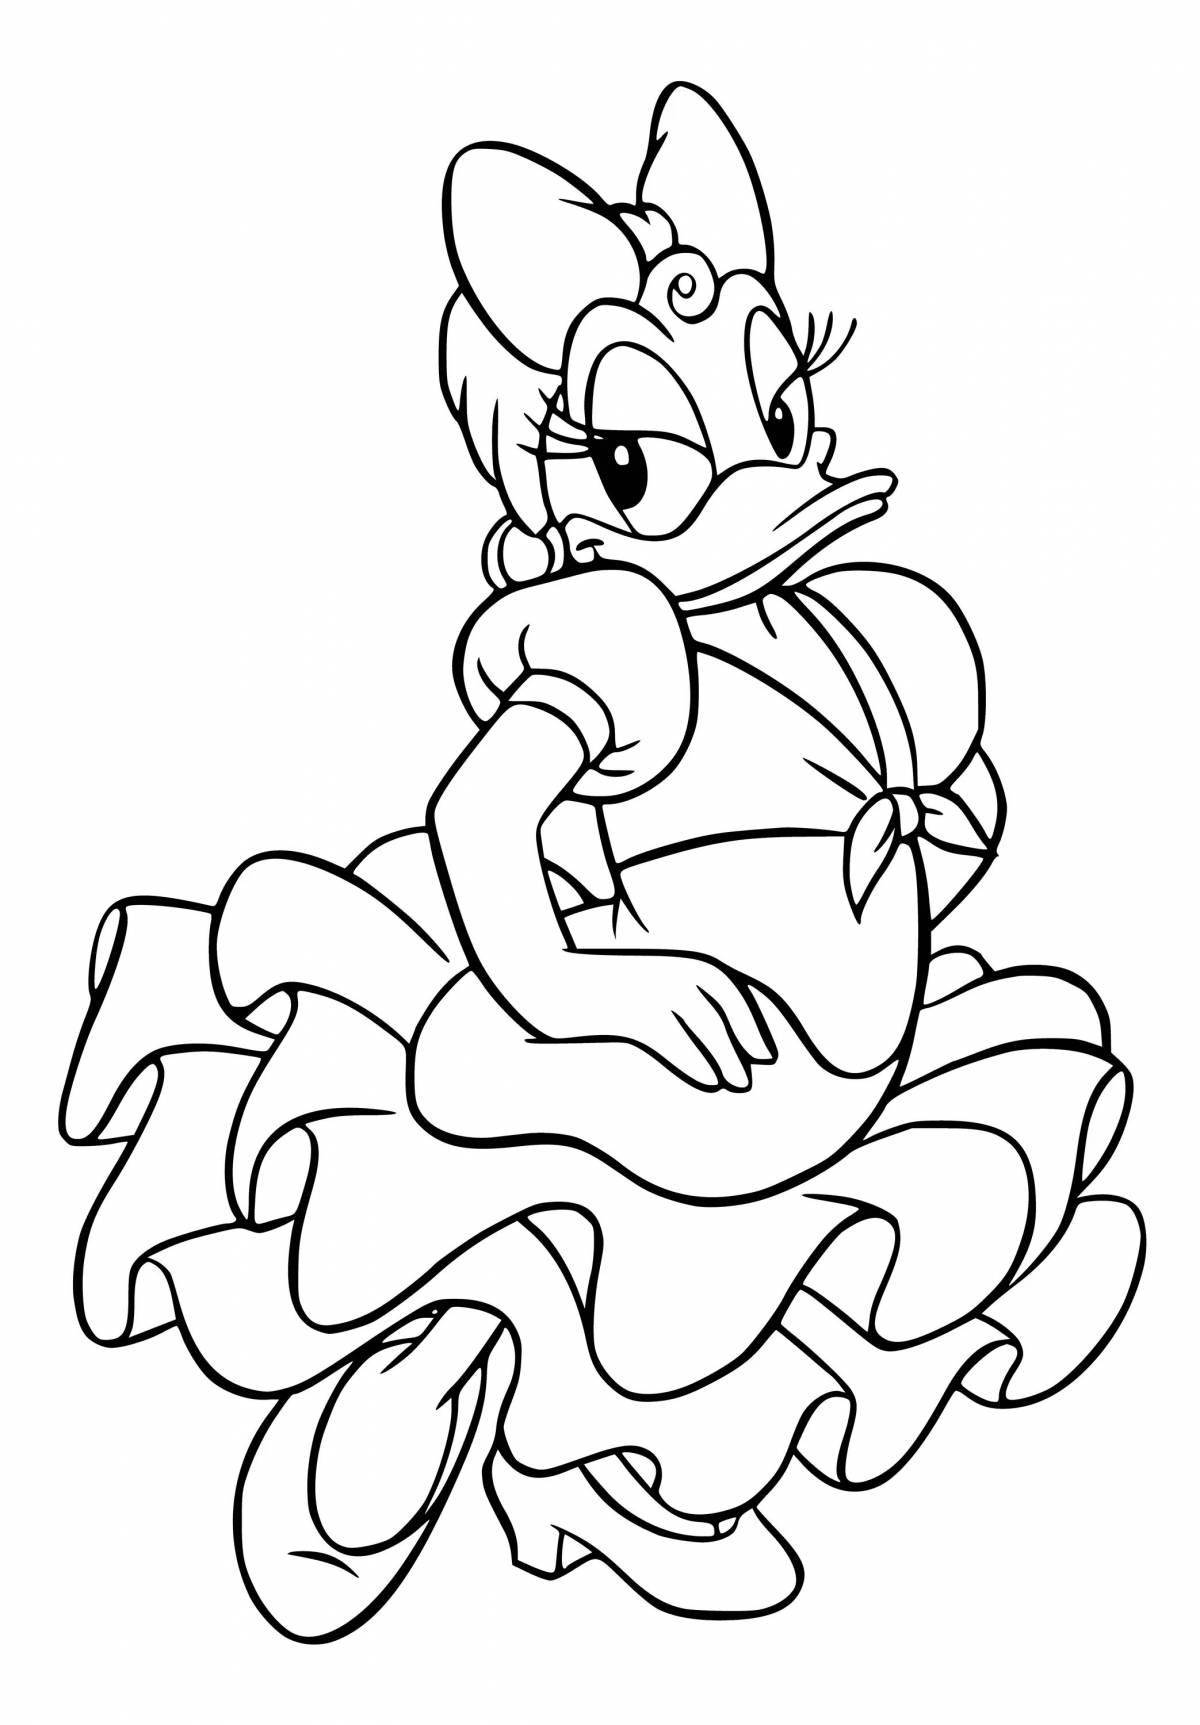 Coloring page wonderful donut